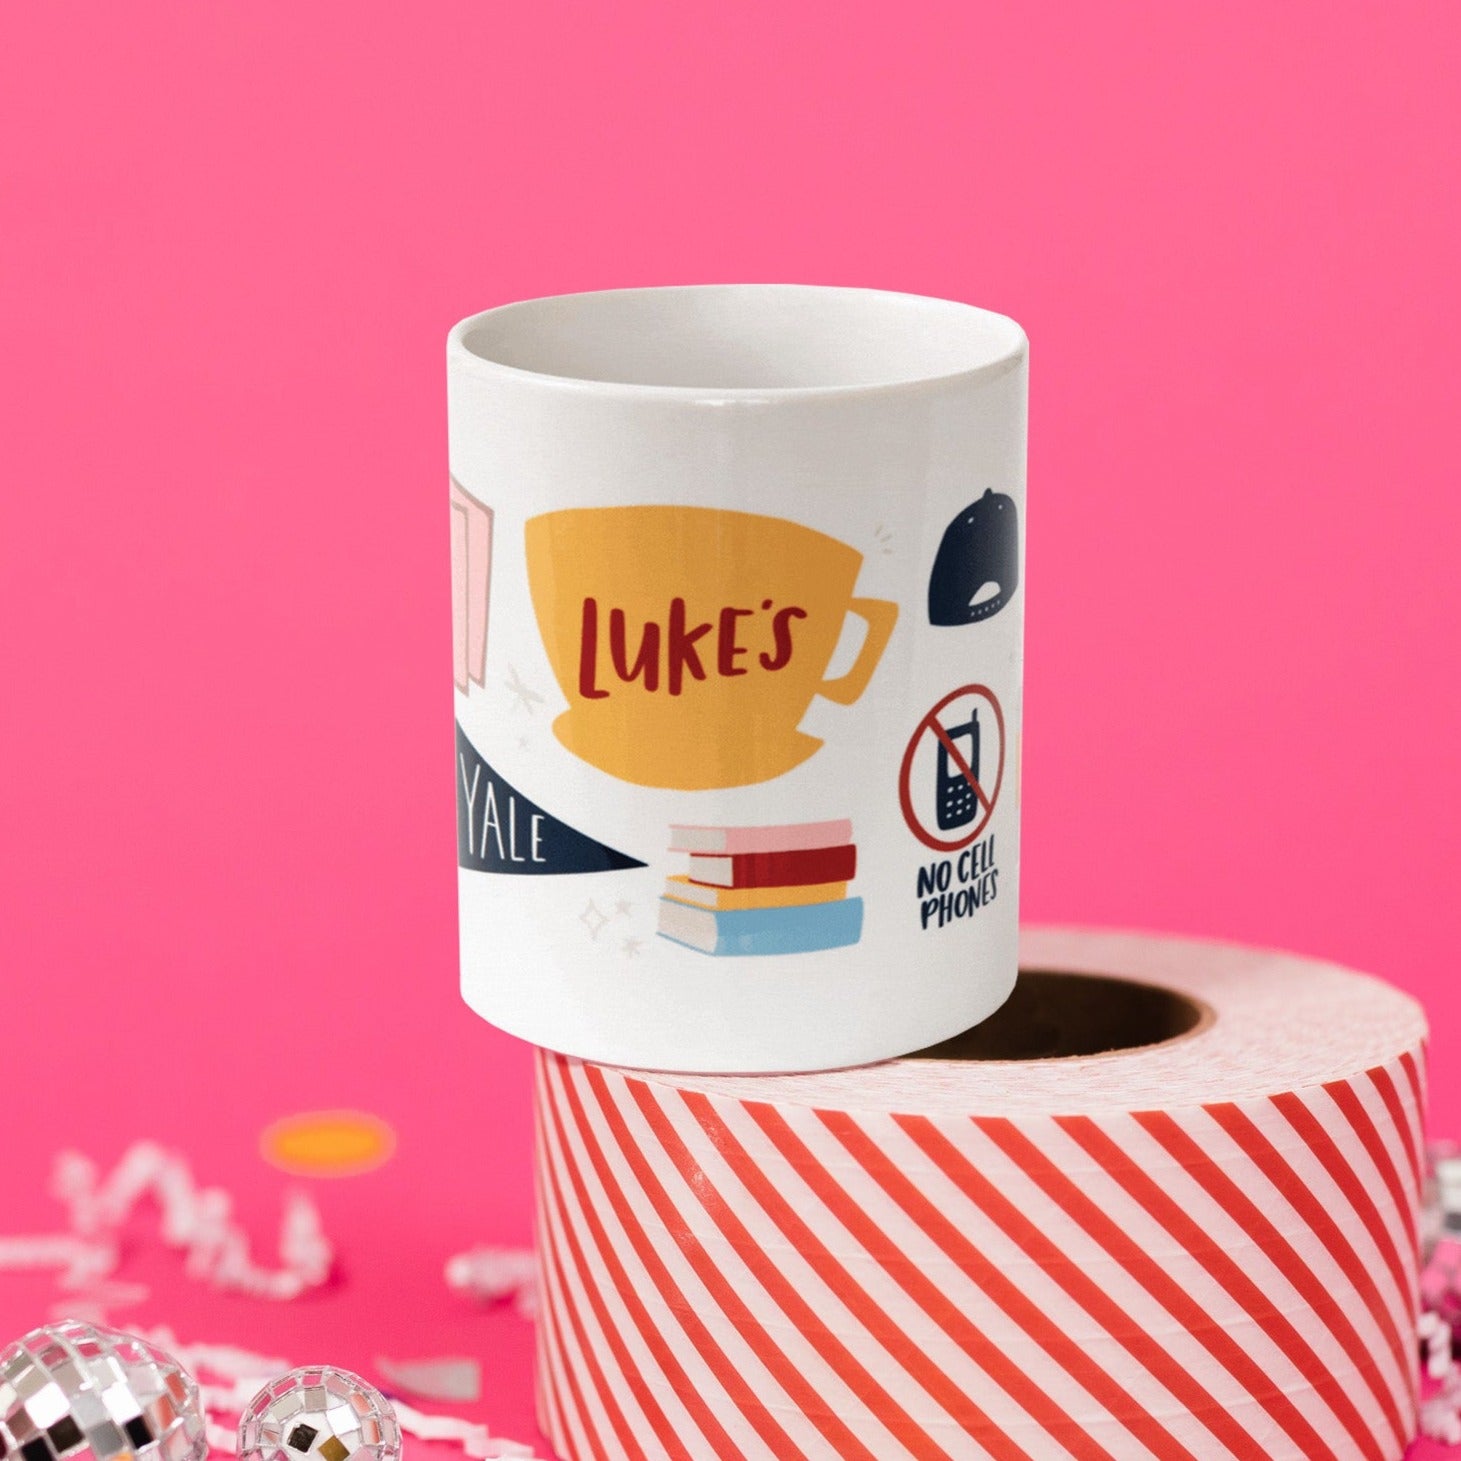 On a hot pink background sits a mug atop a red and white striped roll of packing tape with white crinkle and big, colorful confetti scattered around. There are mini disco balls. This Gilmore Girls inspired white mug has colorful illustrations from the show. It has a coffee mug that says "Luke's." There are books stacked, a cell phone with a red circle and slash on top that says "NO CELL PHONES." There is a navy school banner that says "YALE."